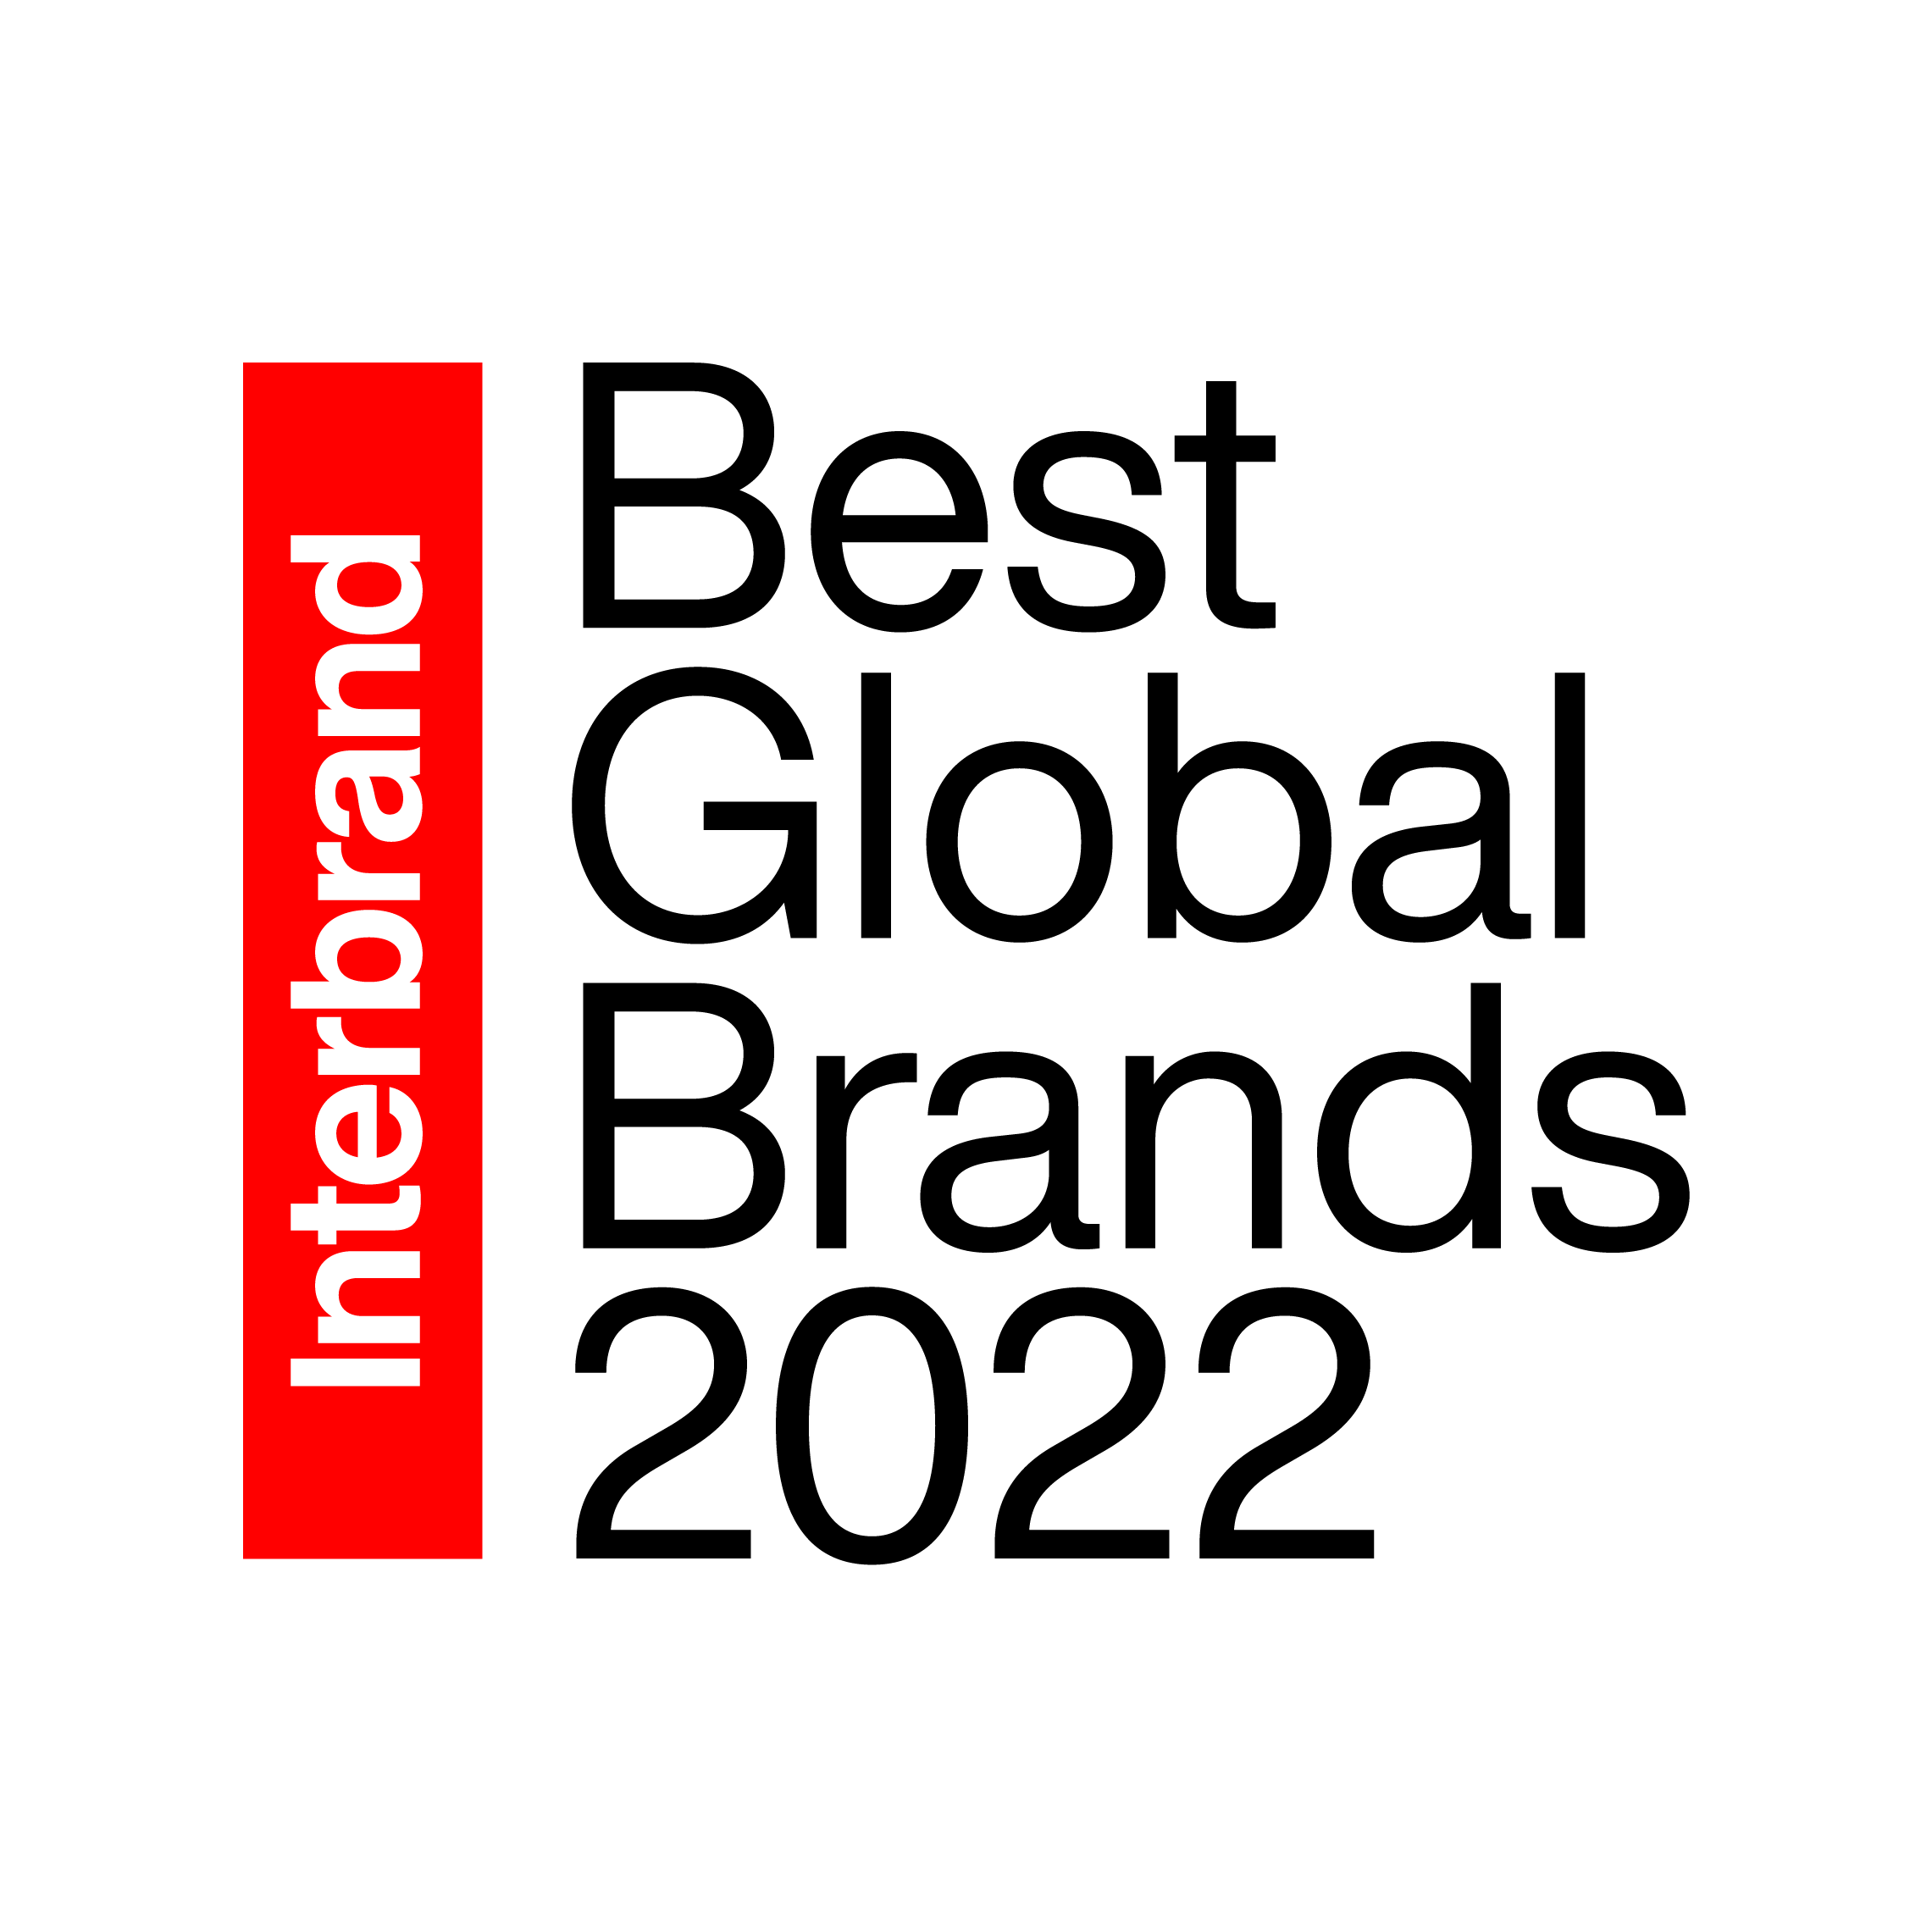 Top 10 makeup brands in the world 2022 